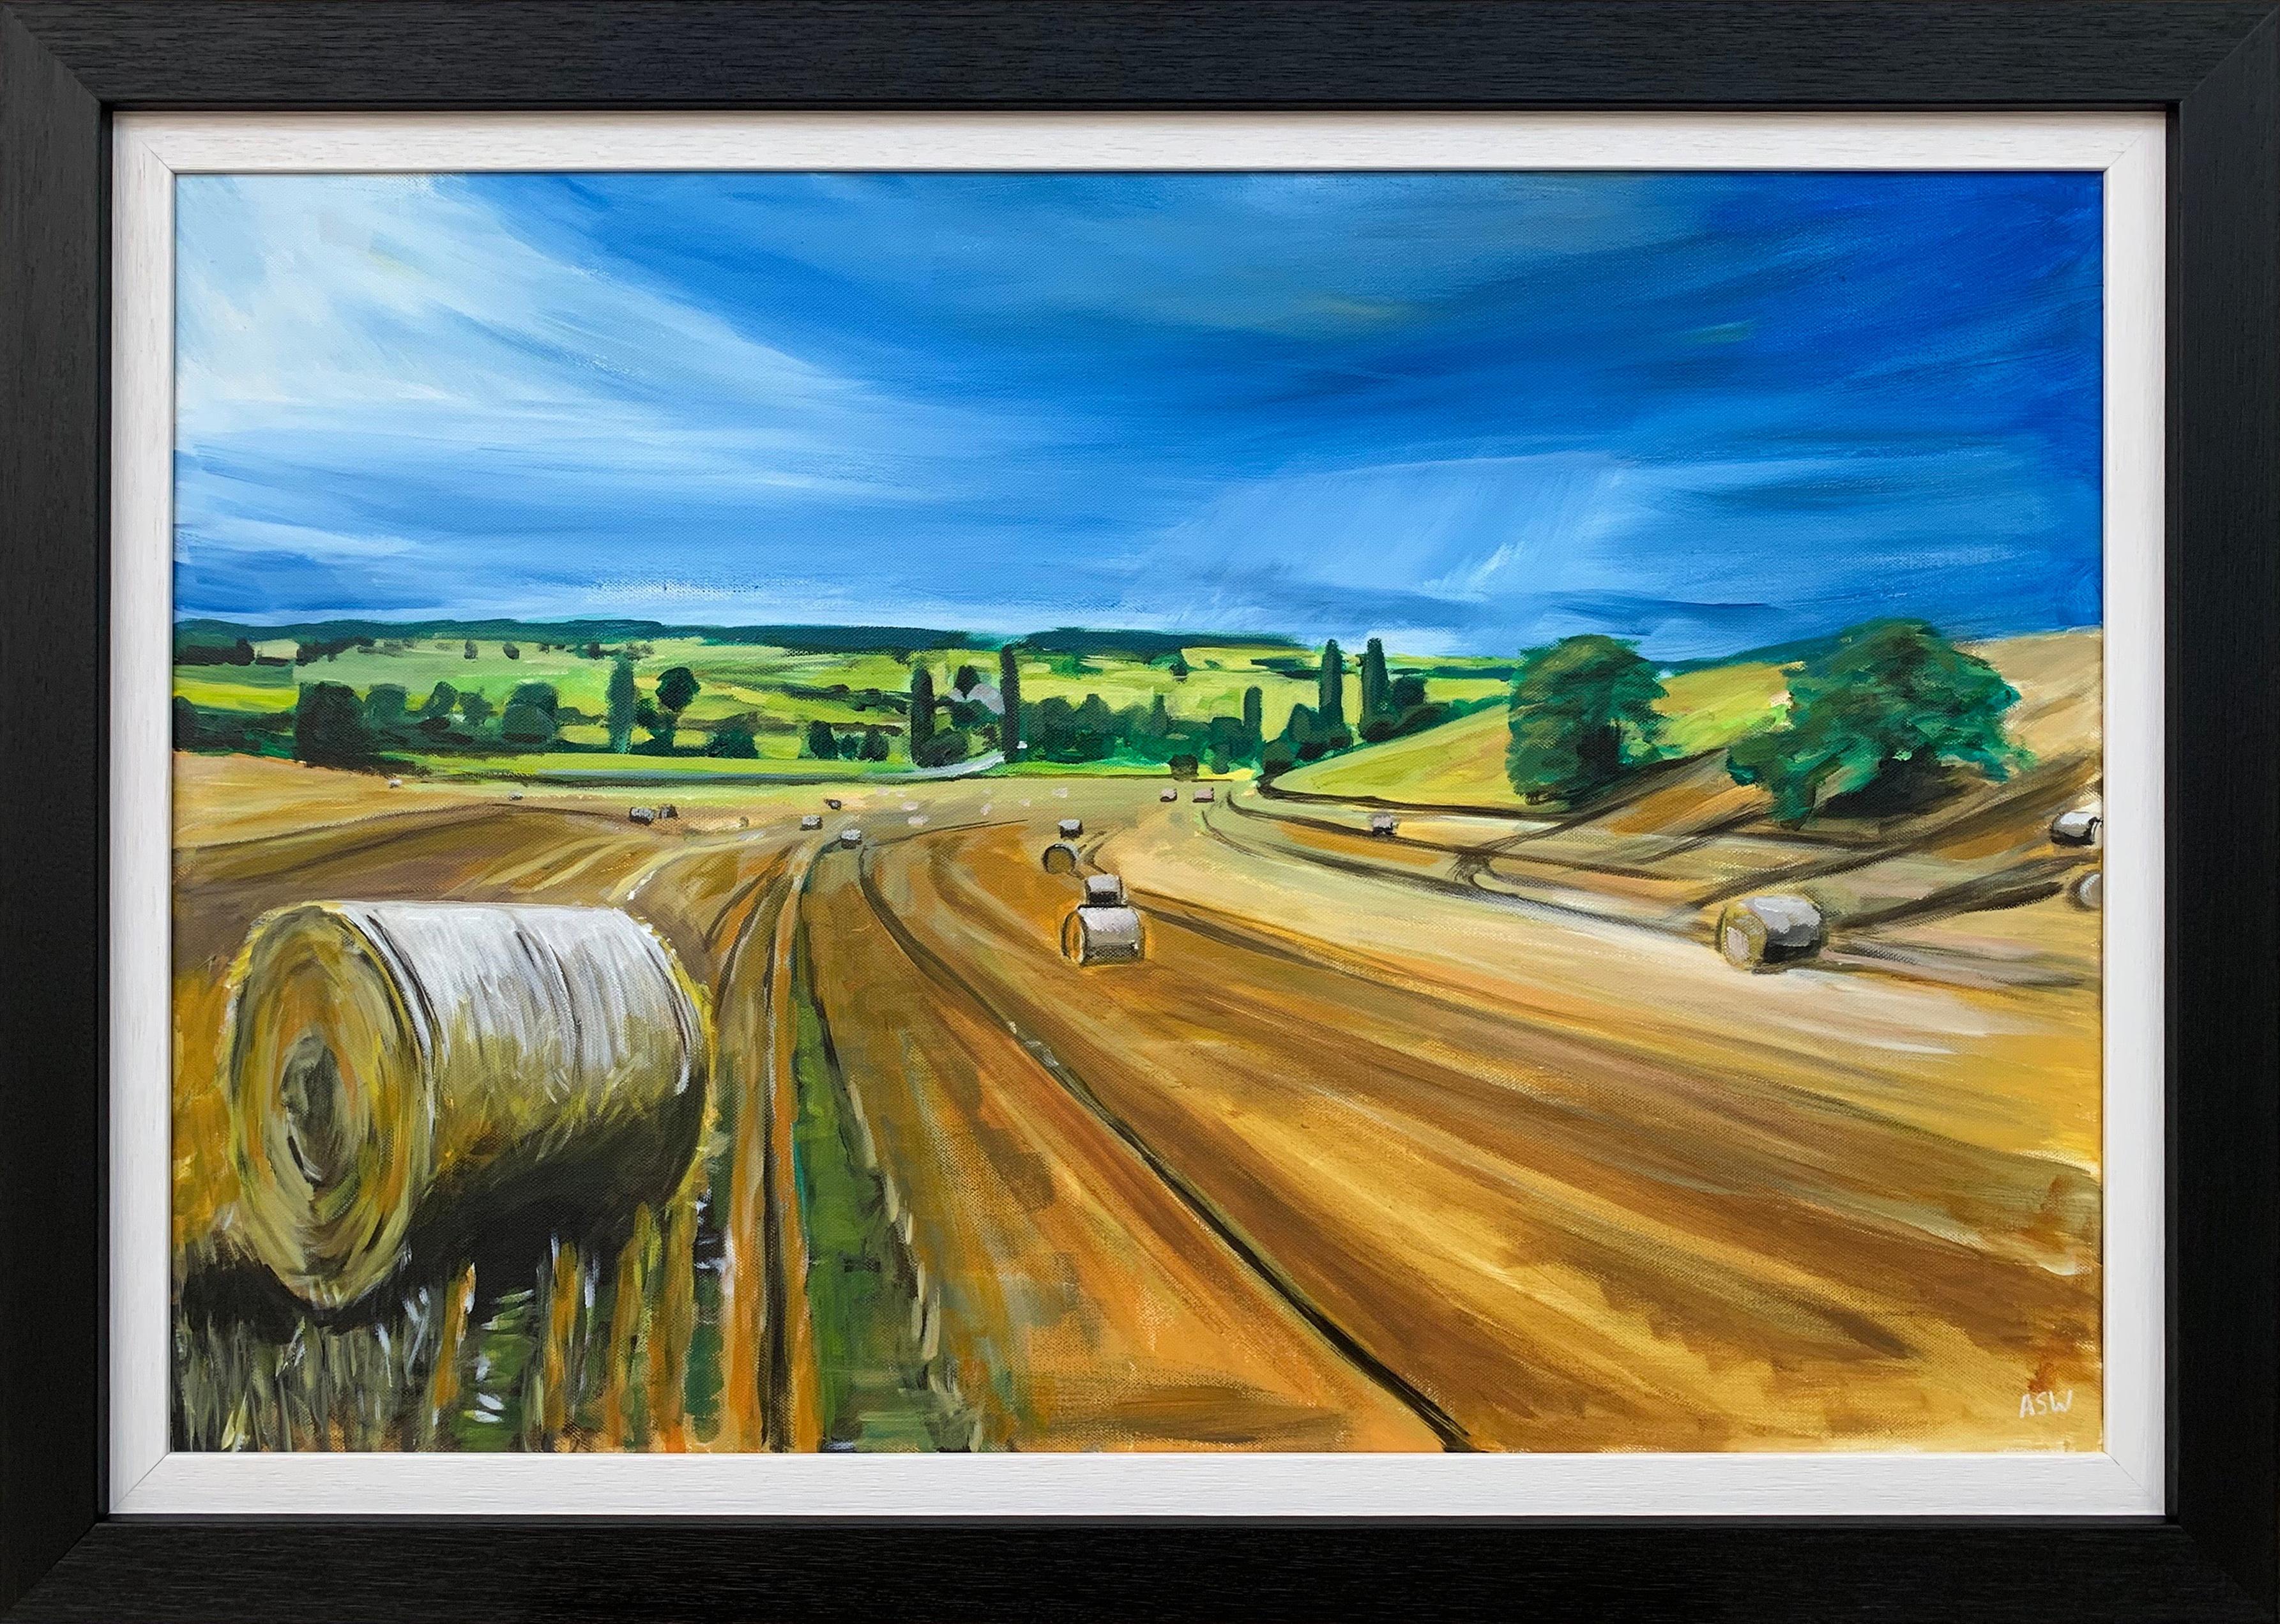 Angela Wakefield Landscape Painting - Original Painting of Wheat Field Harvest in Dordogne France by British Artist